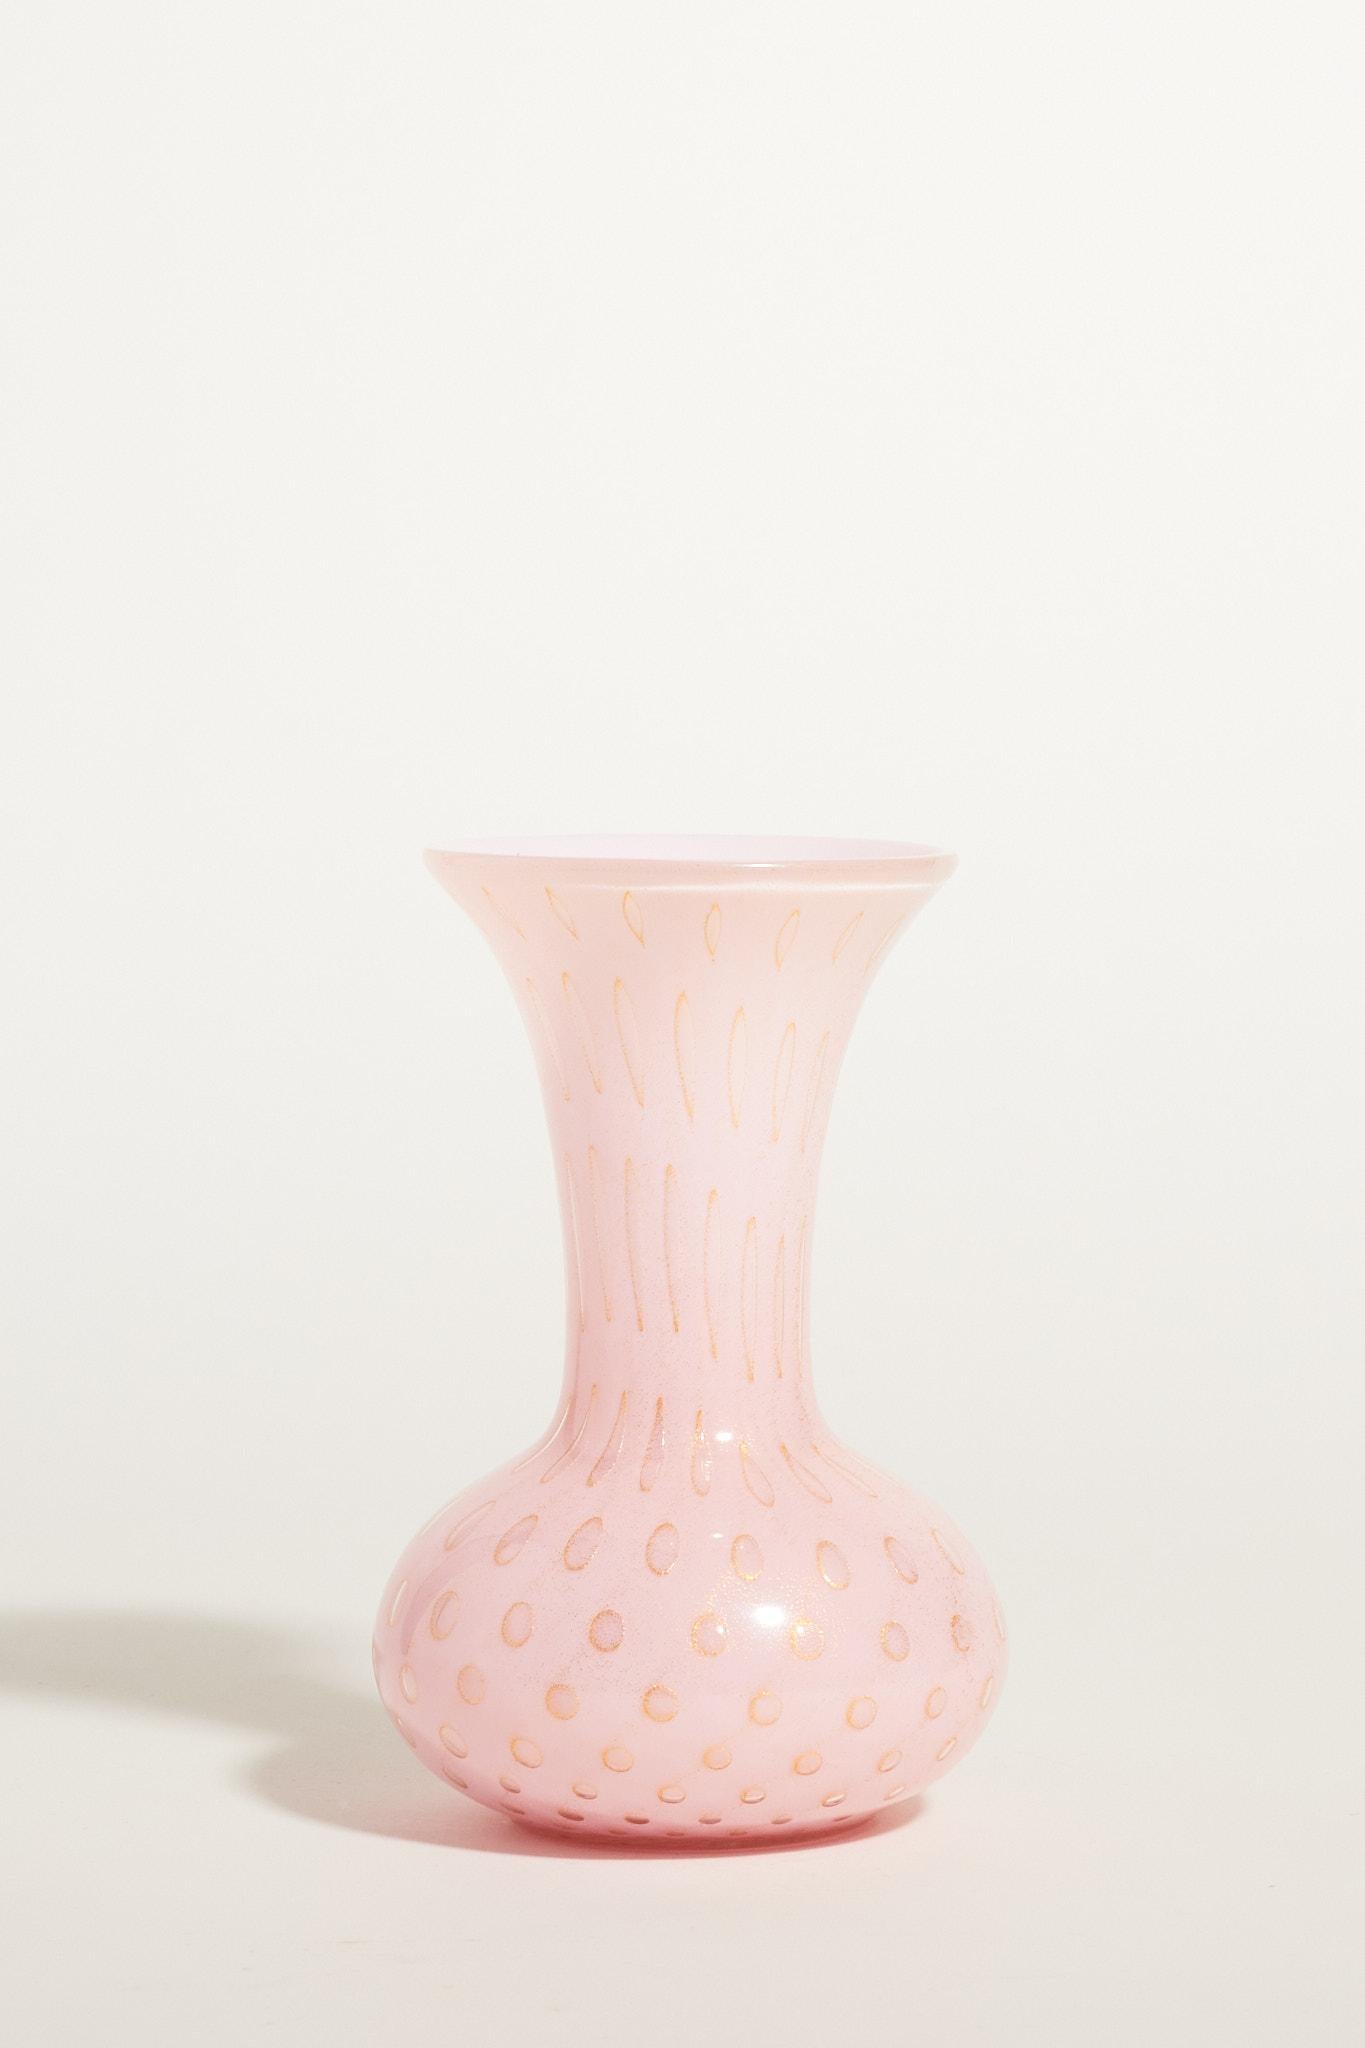 Baby pink Murano glass bud vase with gold circle details.